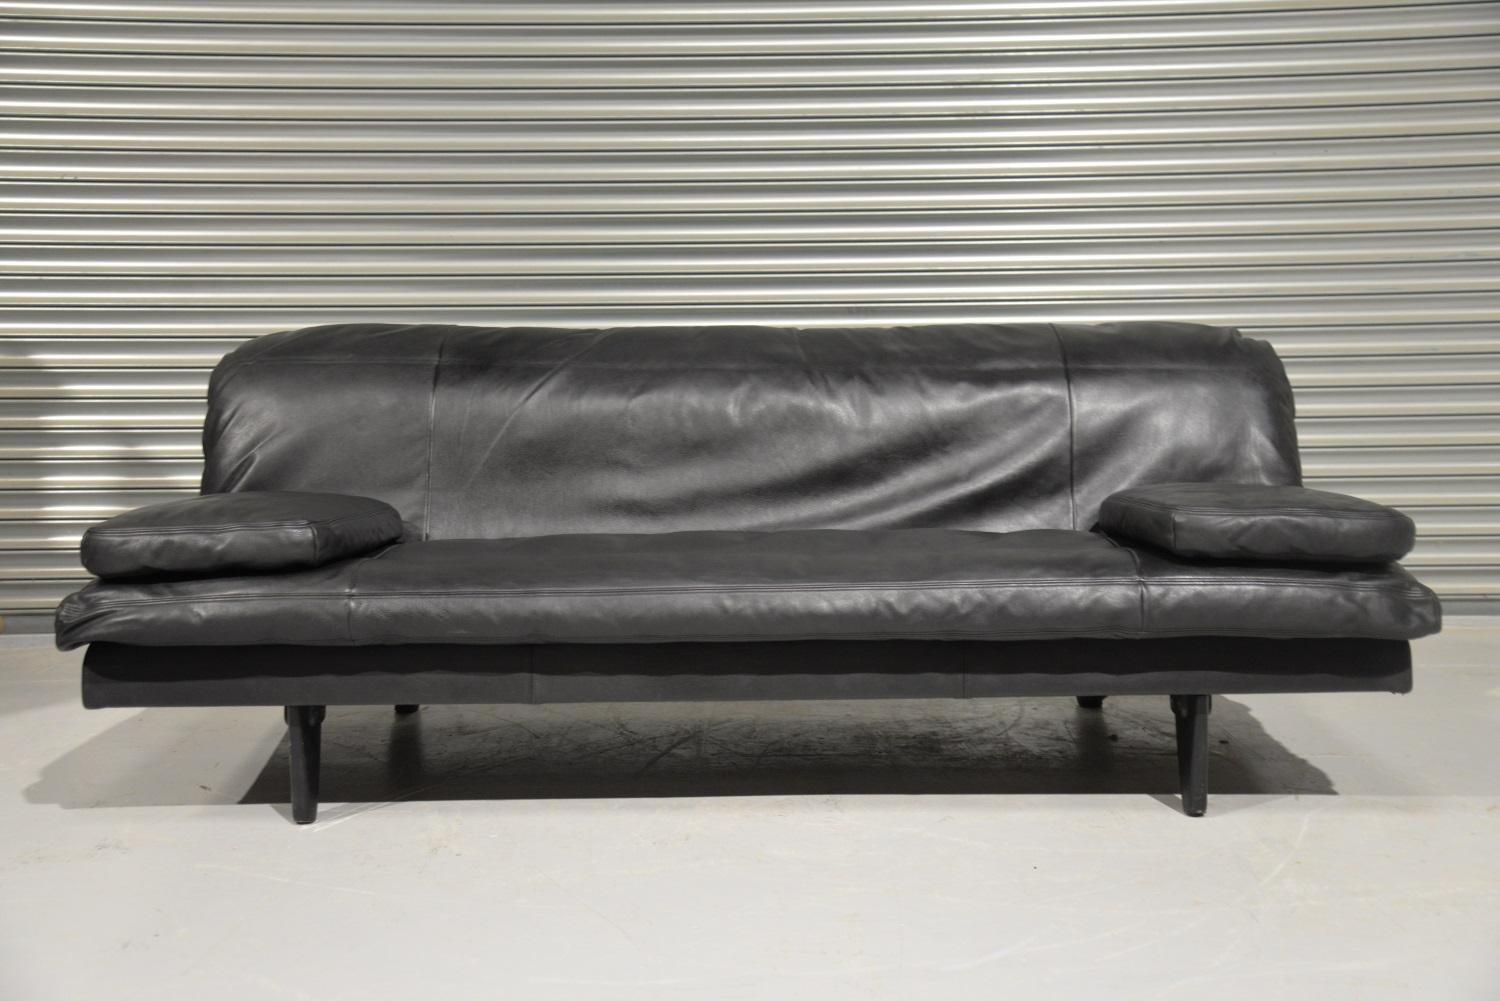 Ultra rare Vintage De Sede DS 169 daybed and sofa 1970s. Designed by Ernst Ambuhler and hand built to incredibly high standards by De Sede craftsman in Switzerland. The daybed easily converts into a double bed with a removable seating cushion that